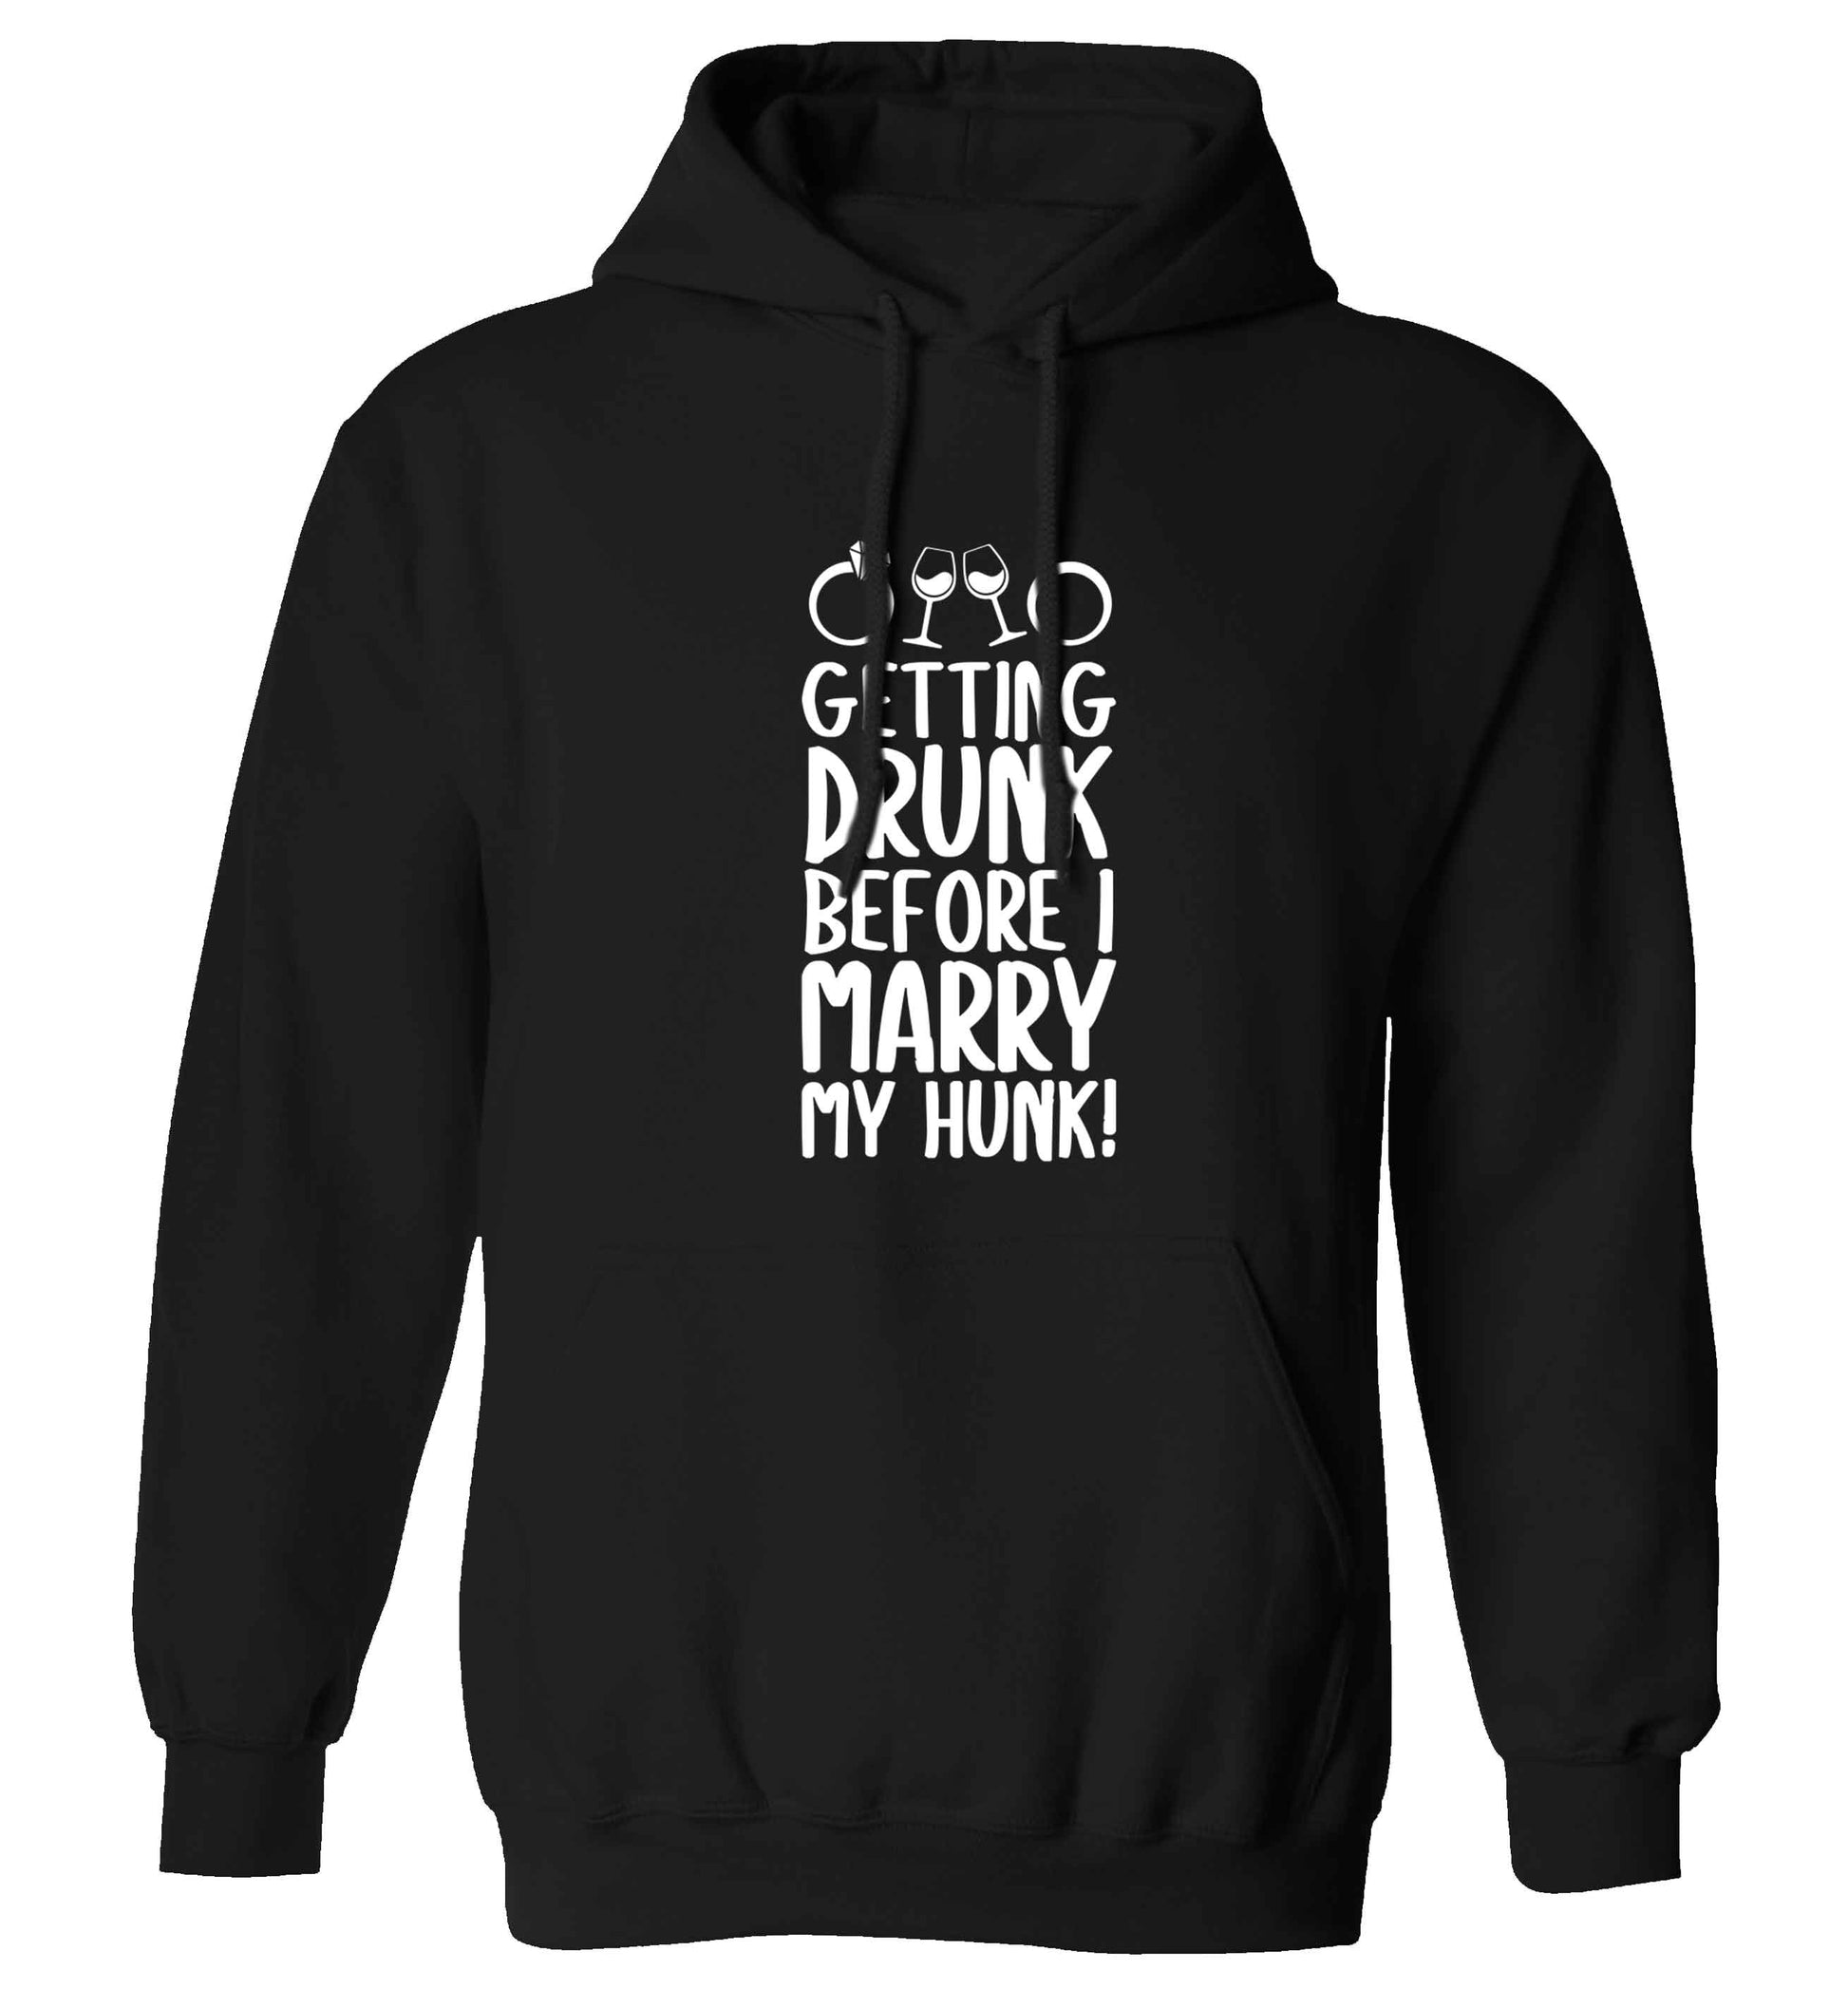 Getting drunk before I marry my hunk adults unisex black hoodie 2XL